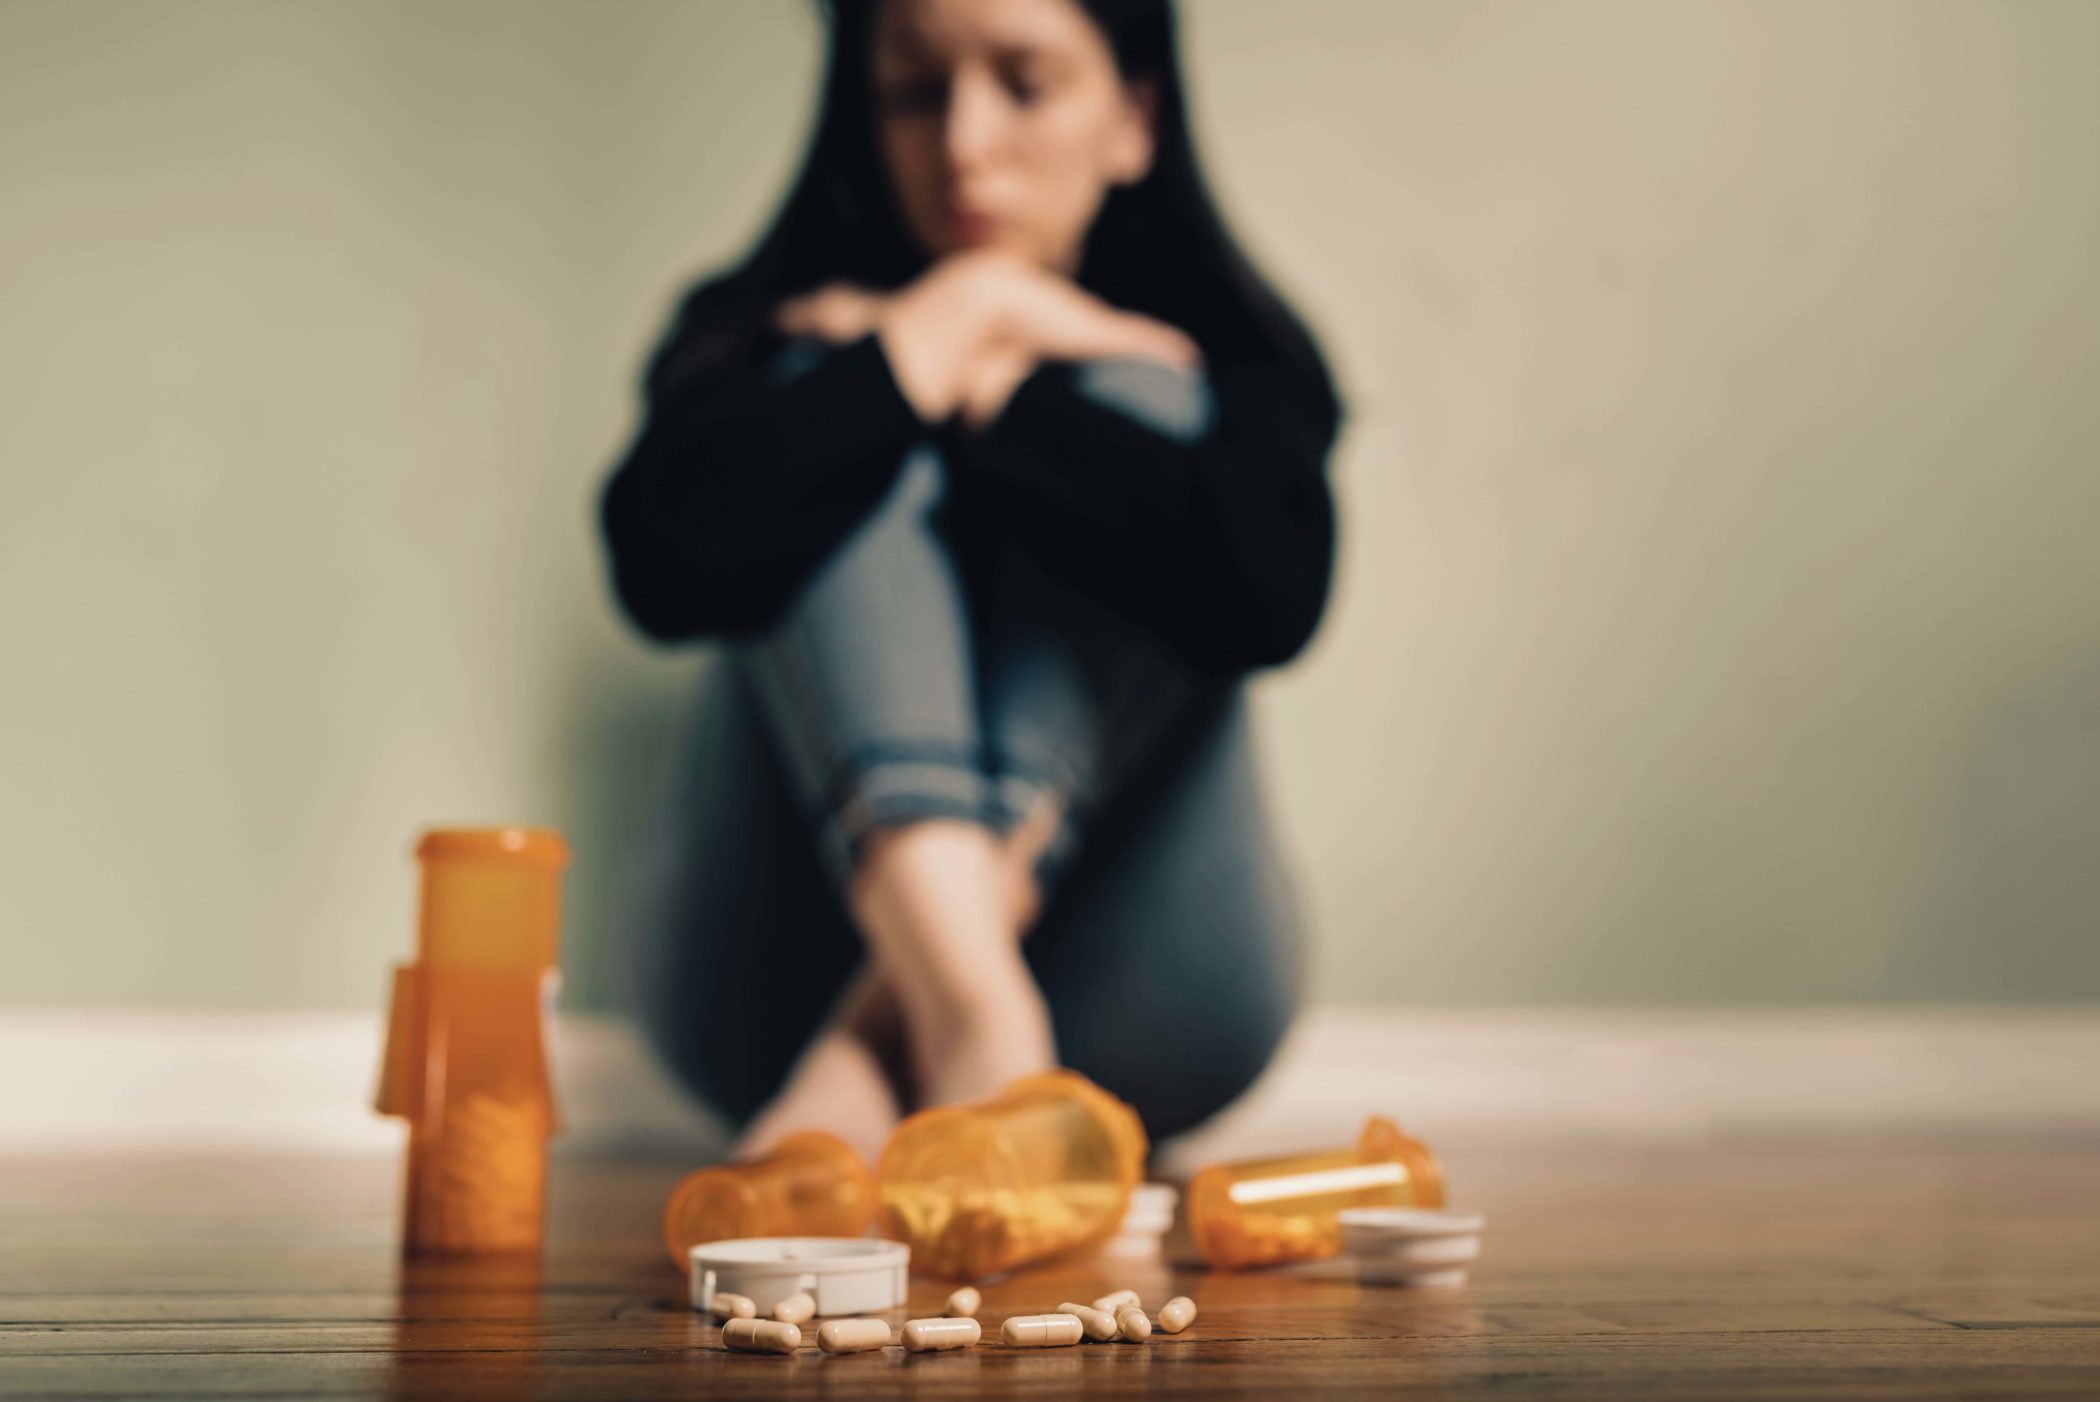 woman with anxiety considering taking drugs